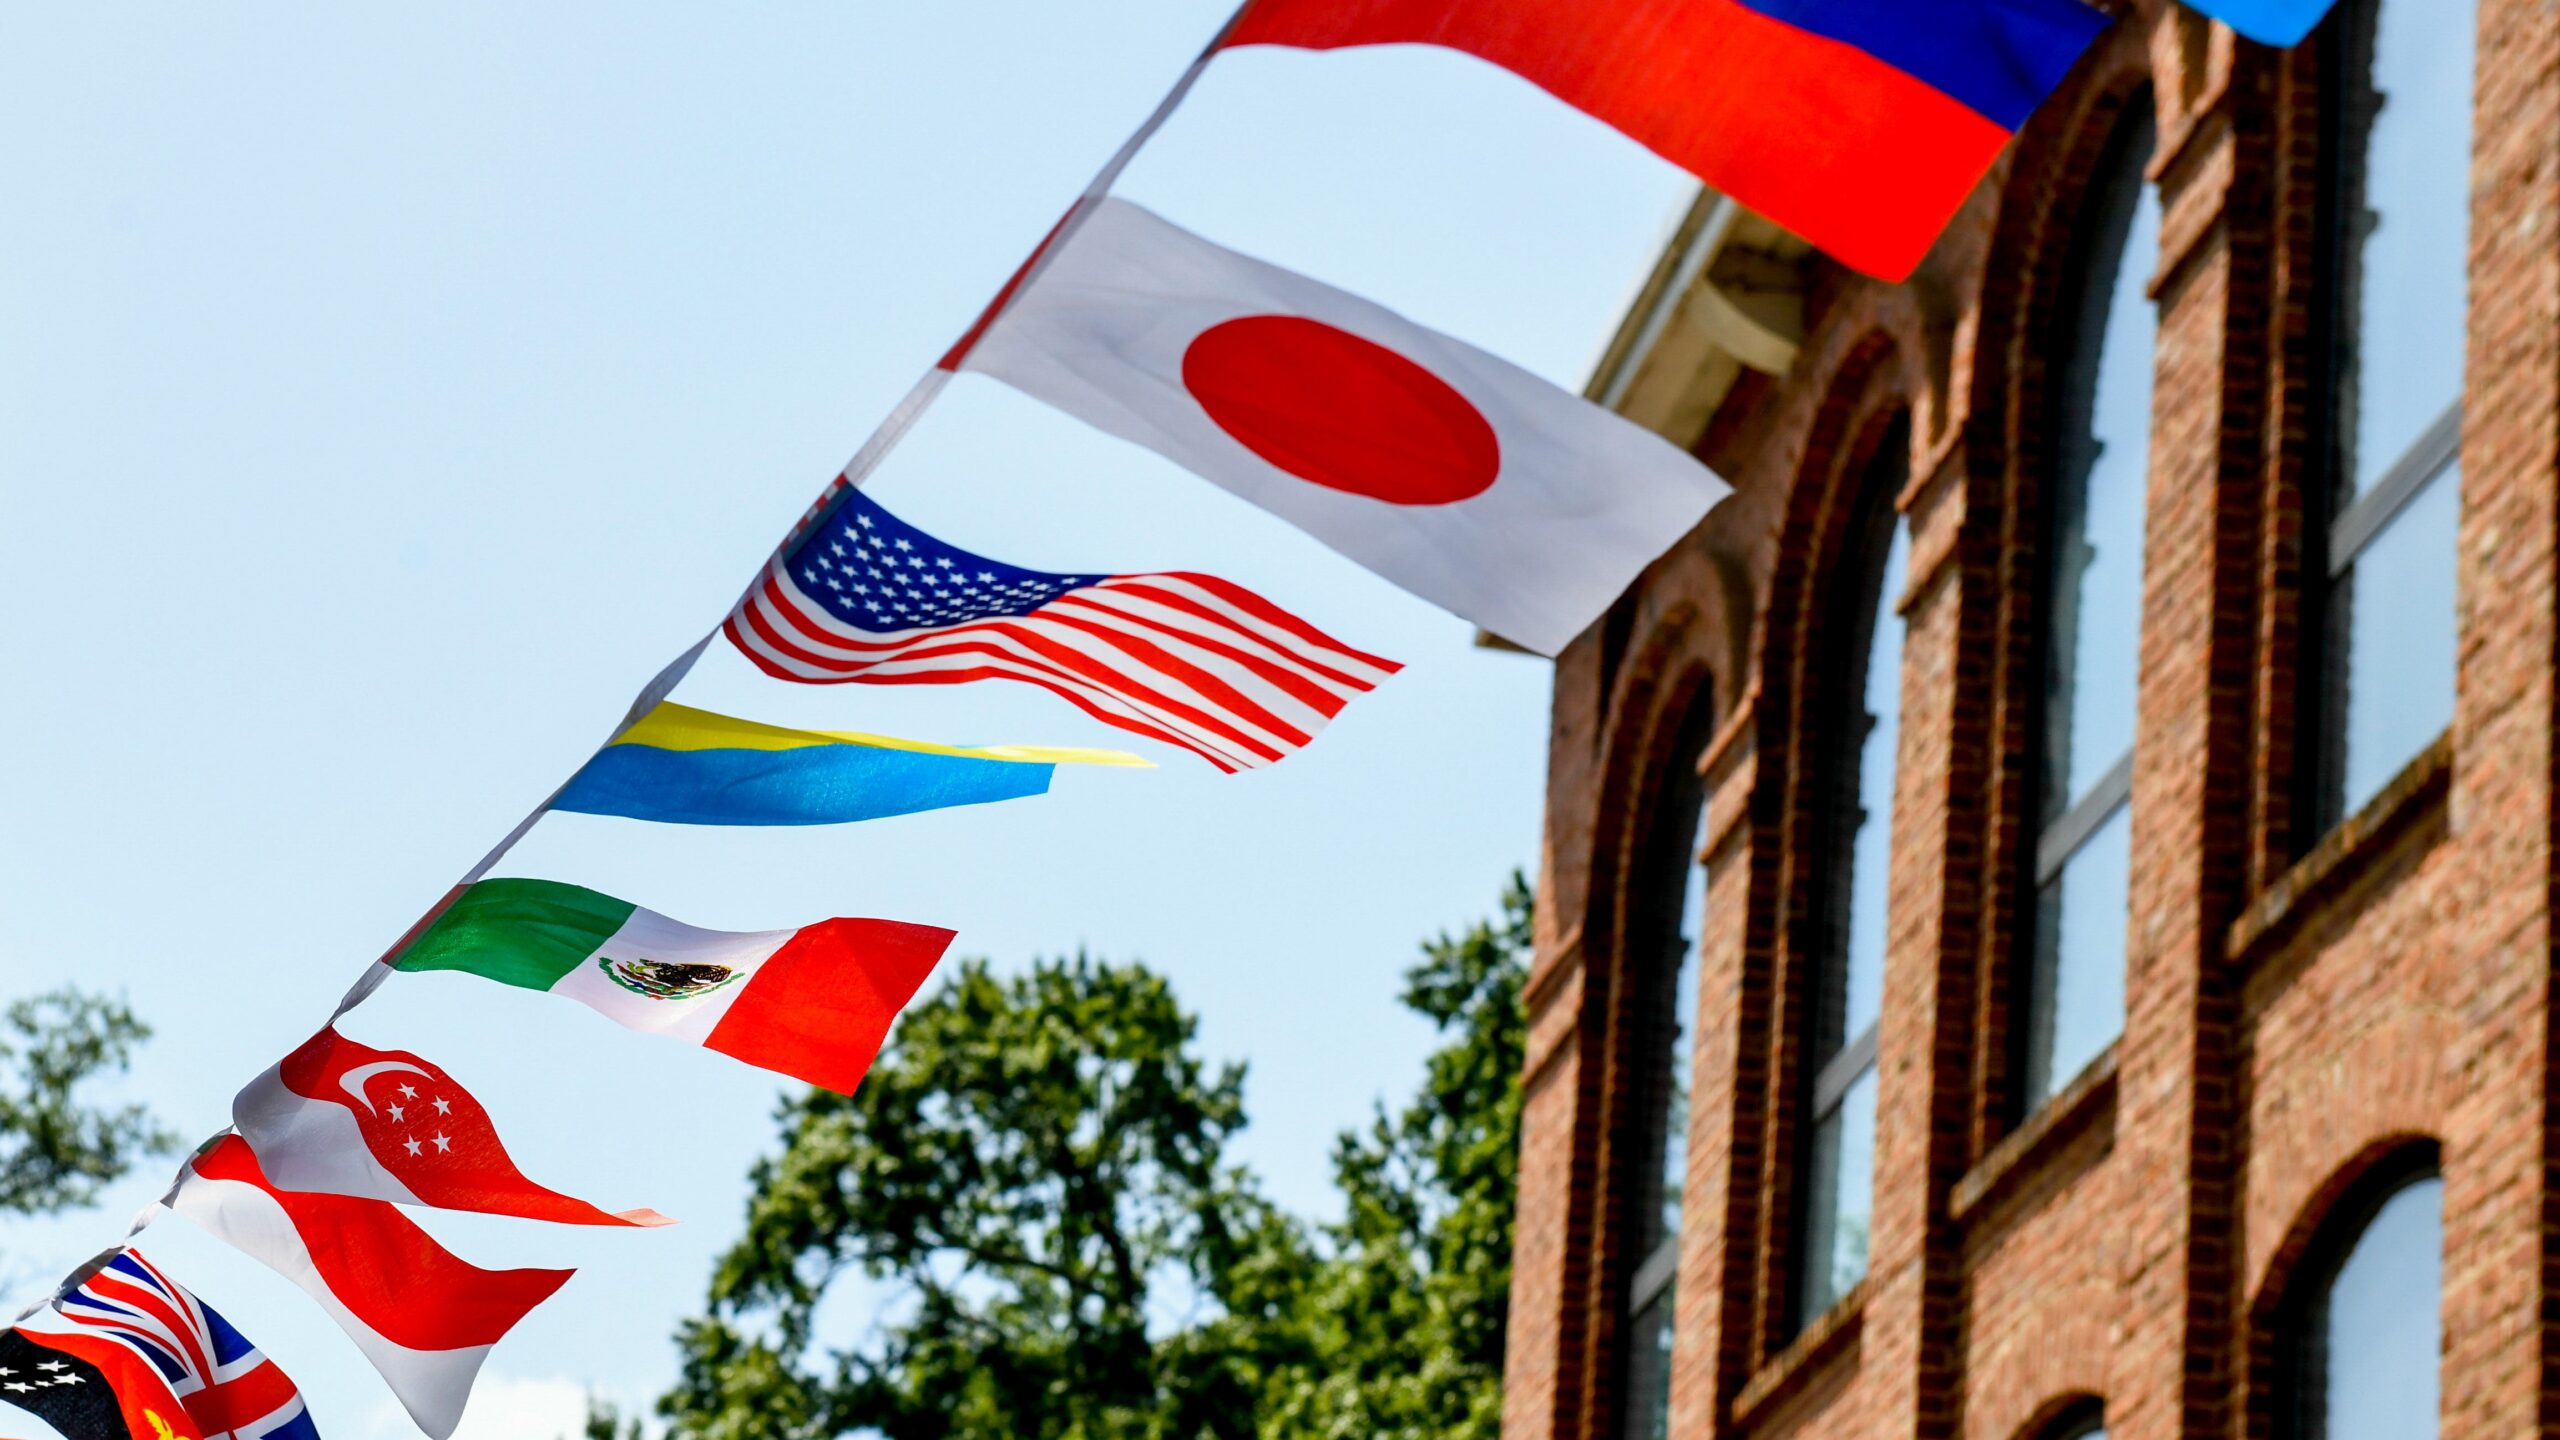 String of international flags against a blue sky next to a brick building